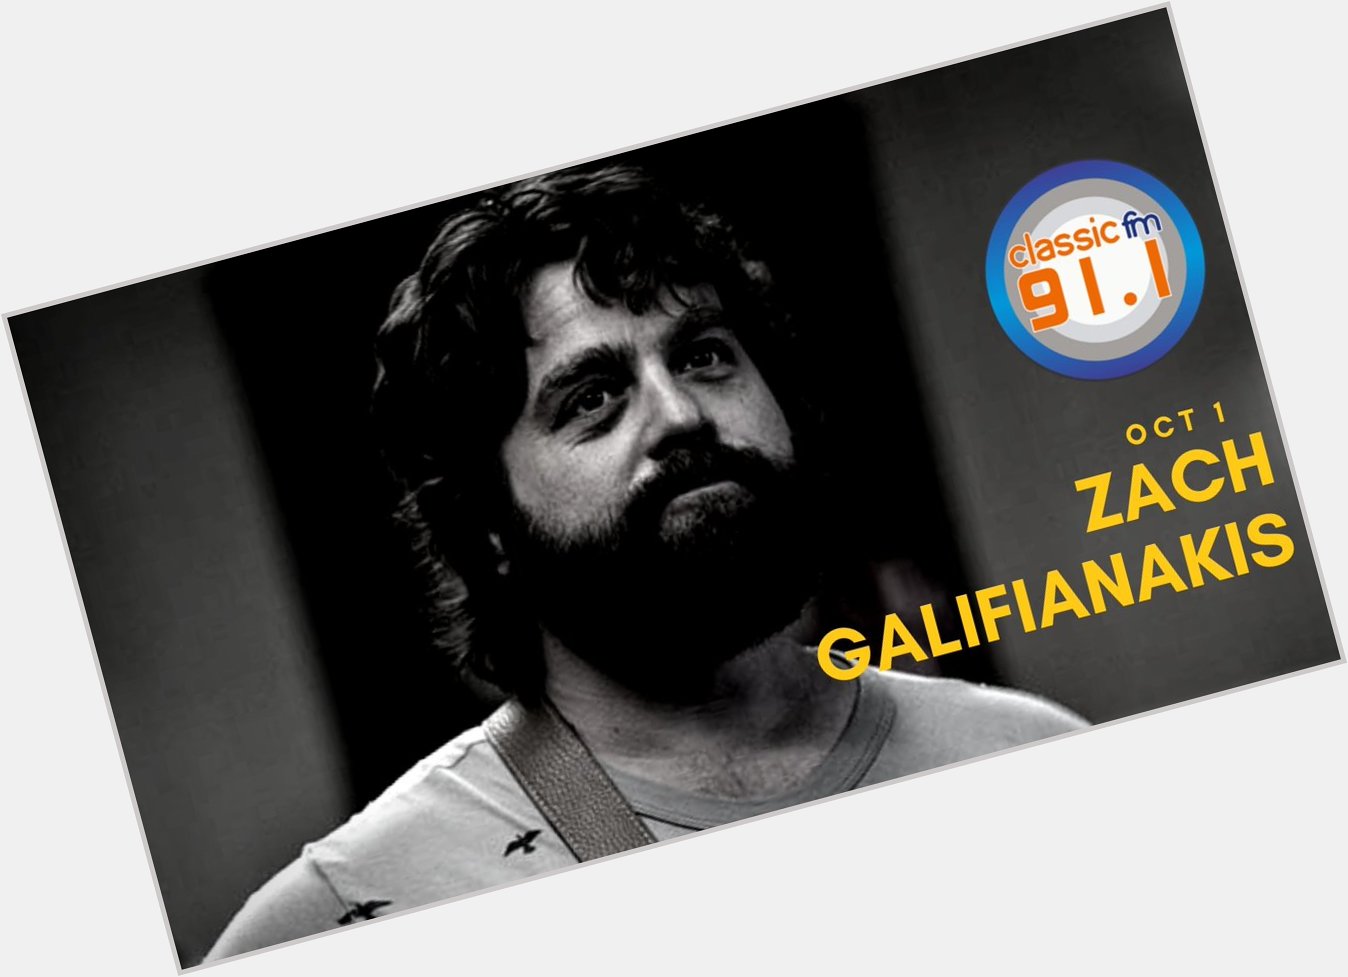 Happy birthday to comedian and actor Zach Galifianakis, who rose to fame for his role in The Hangover 1, 2 and 3 